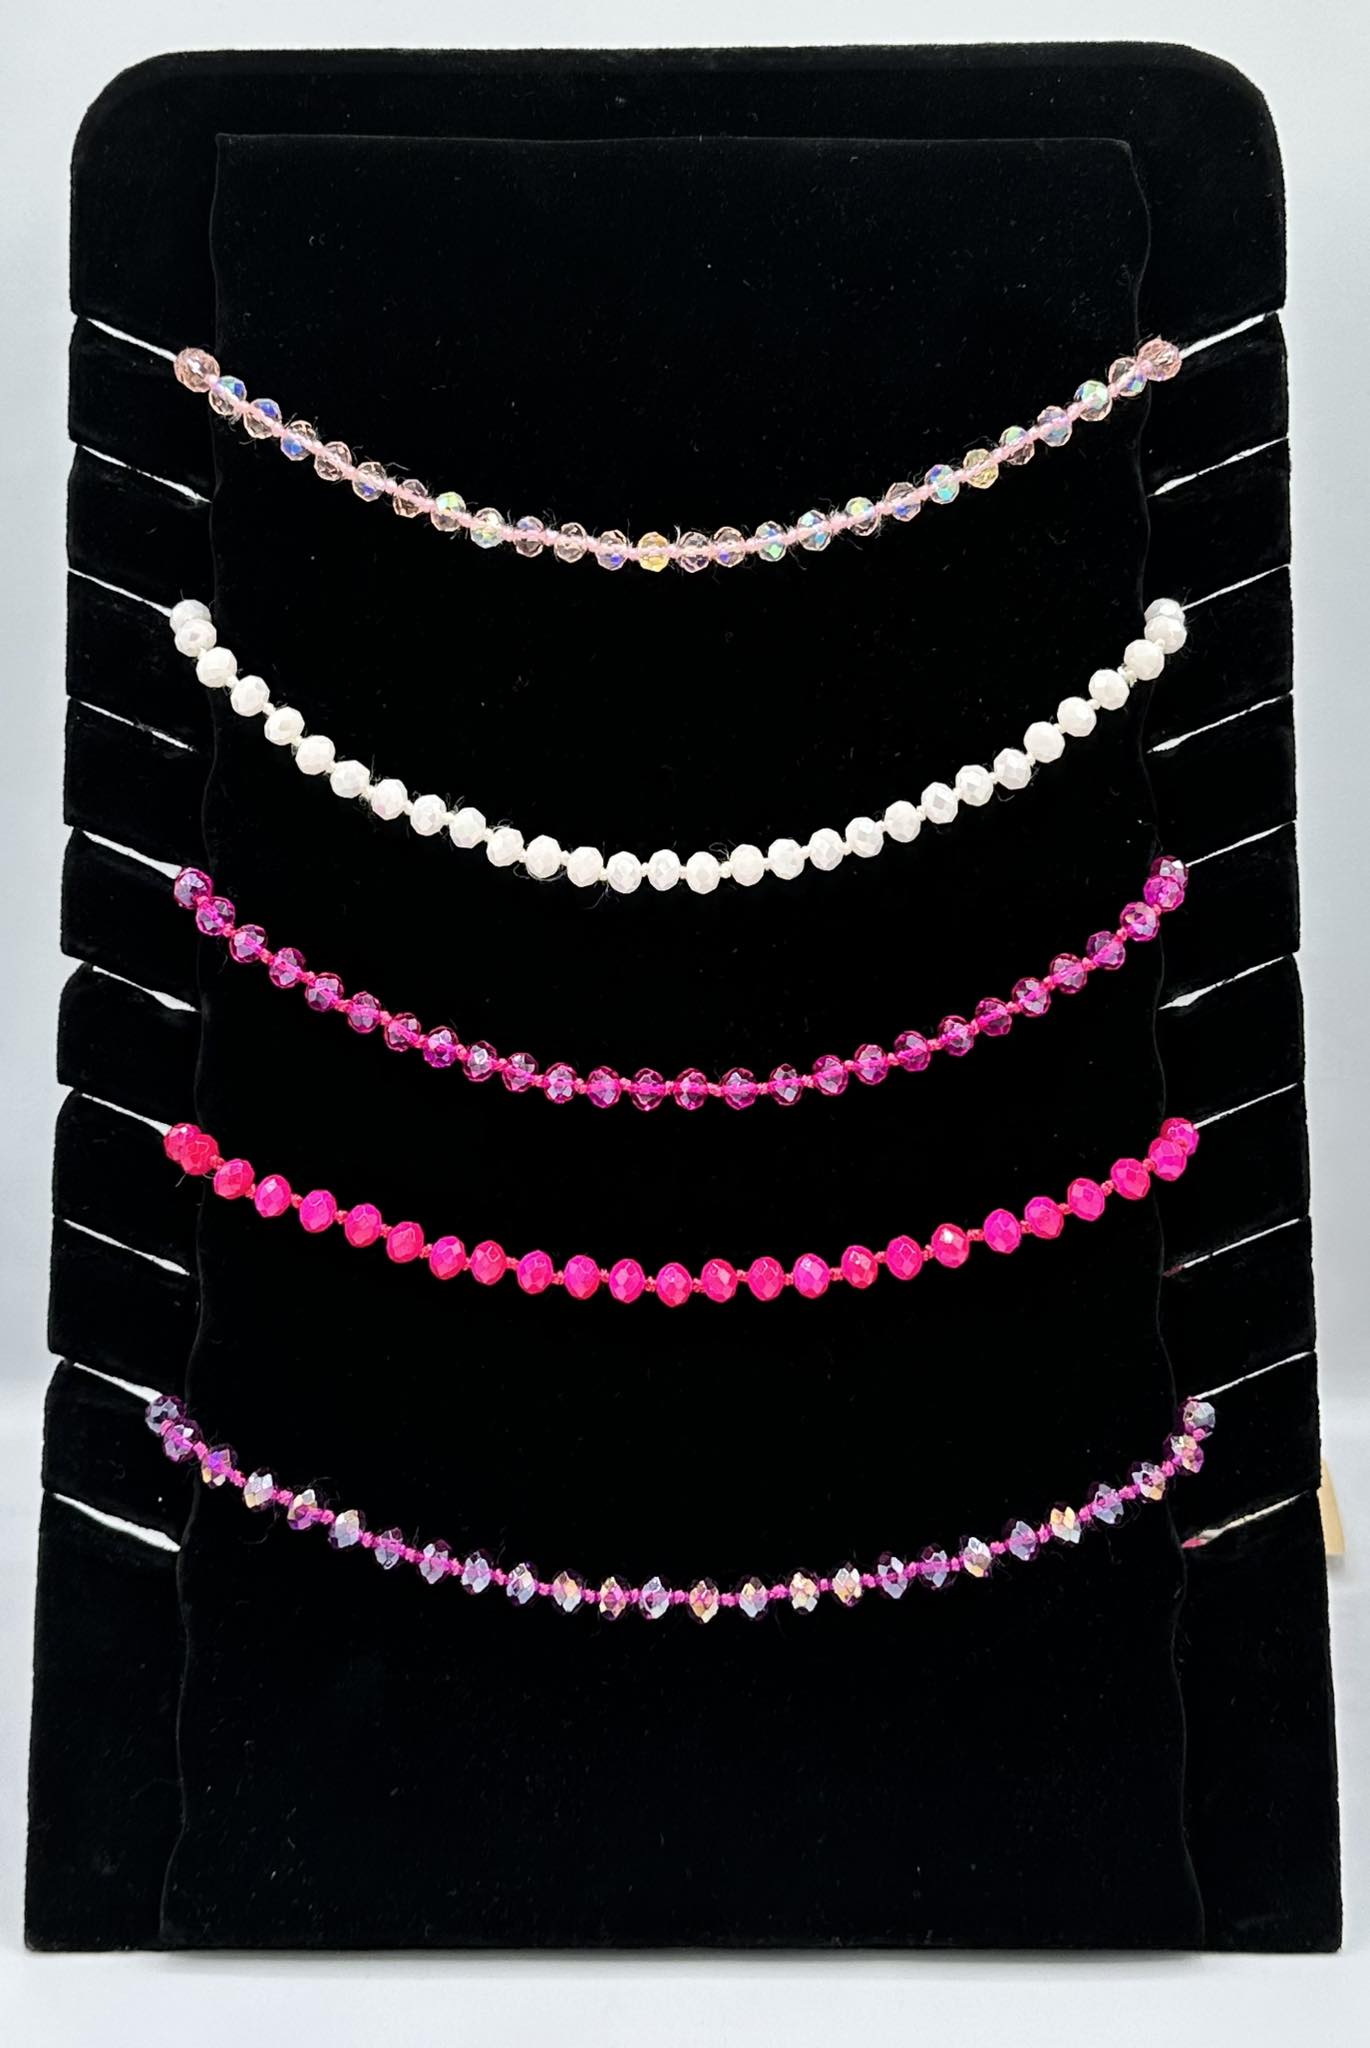 More Pink Necklaces